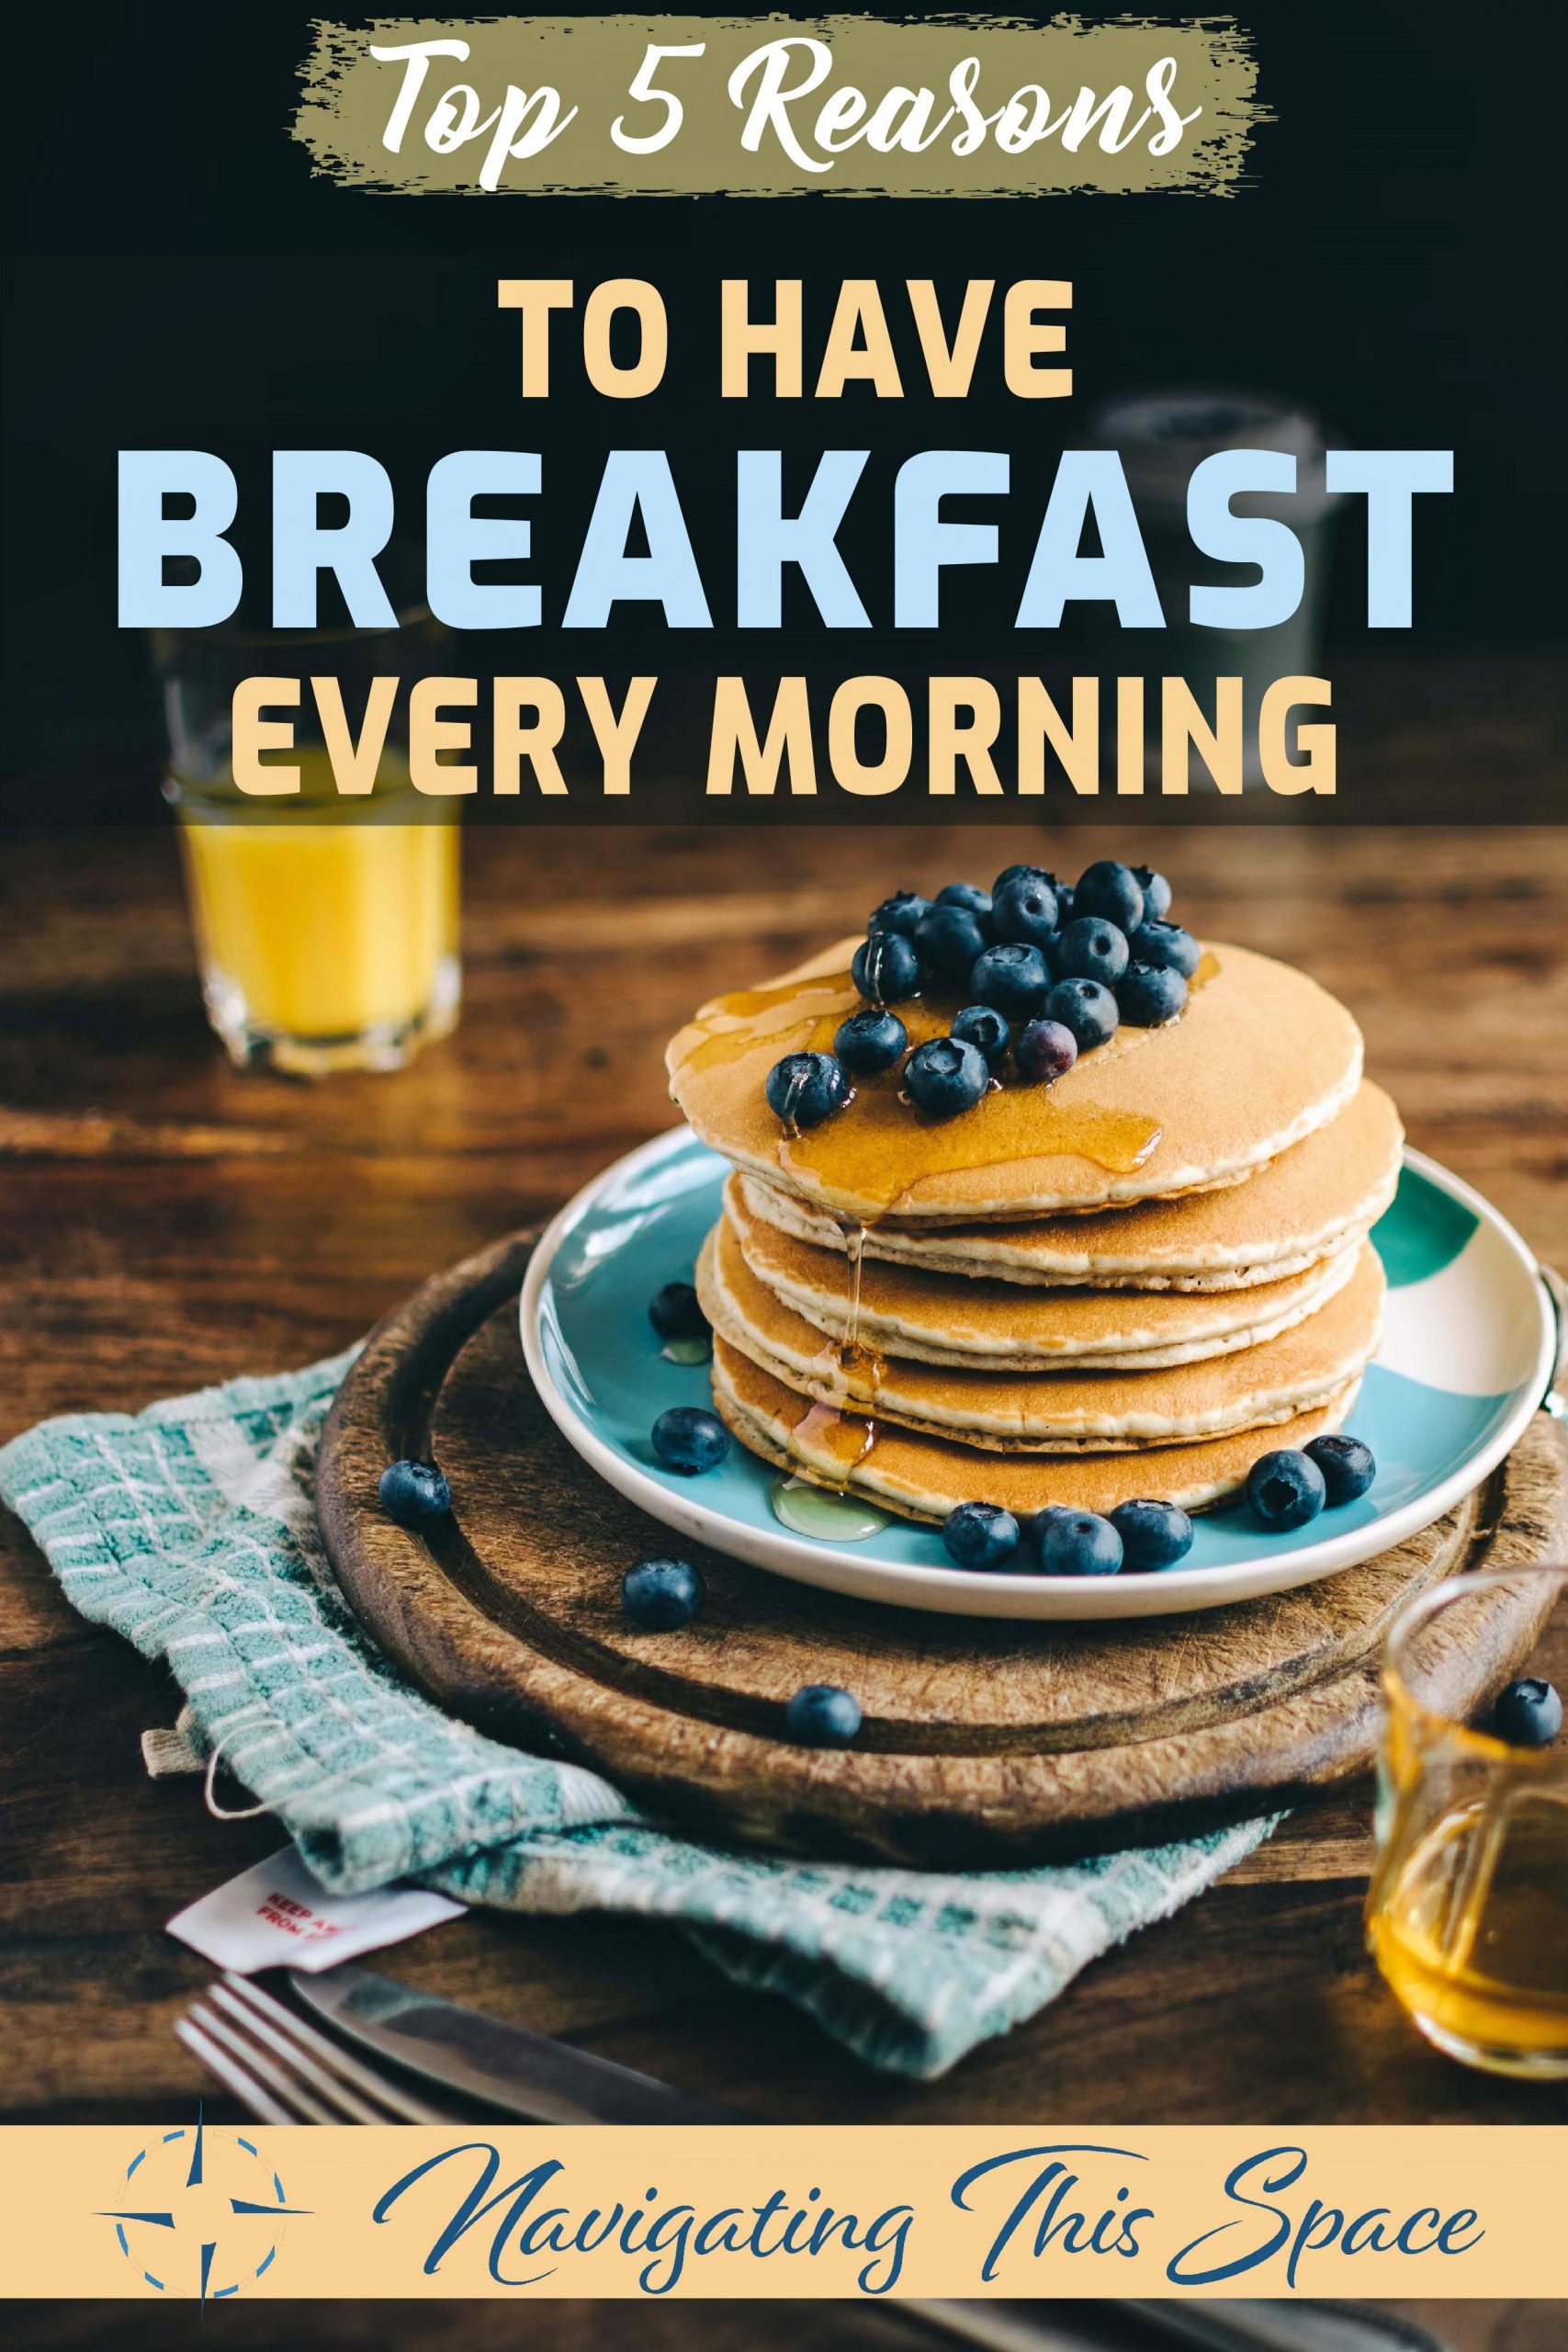 5 Reasons to have breakfast every morning